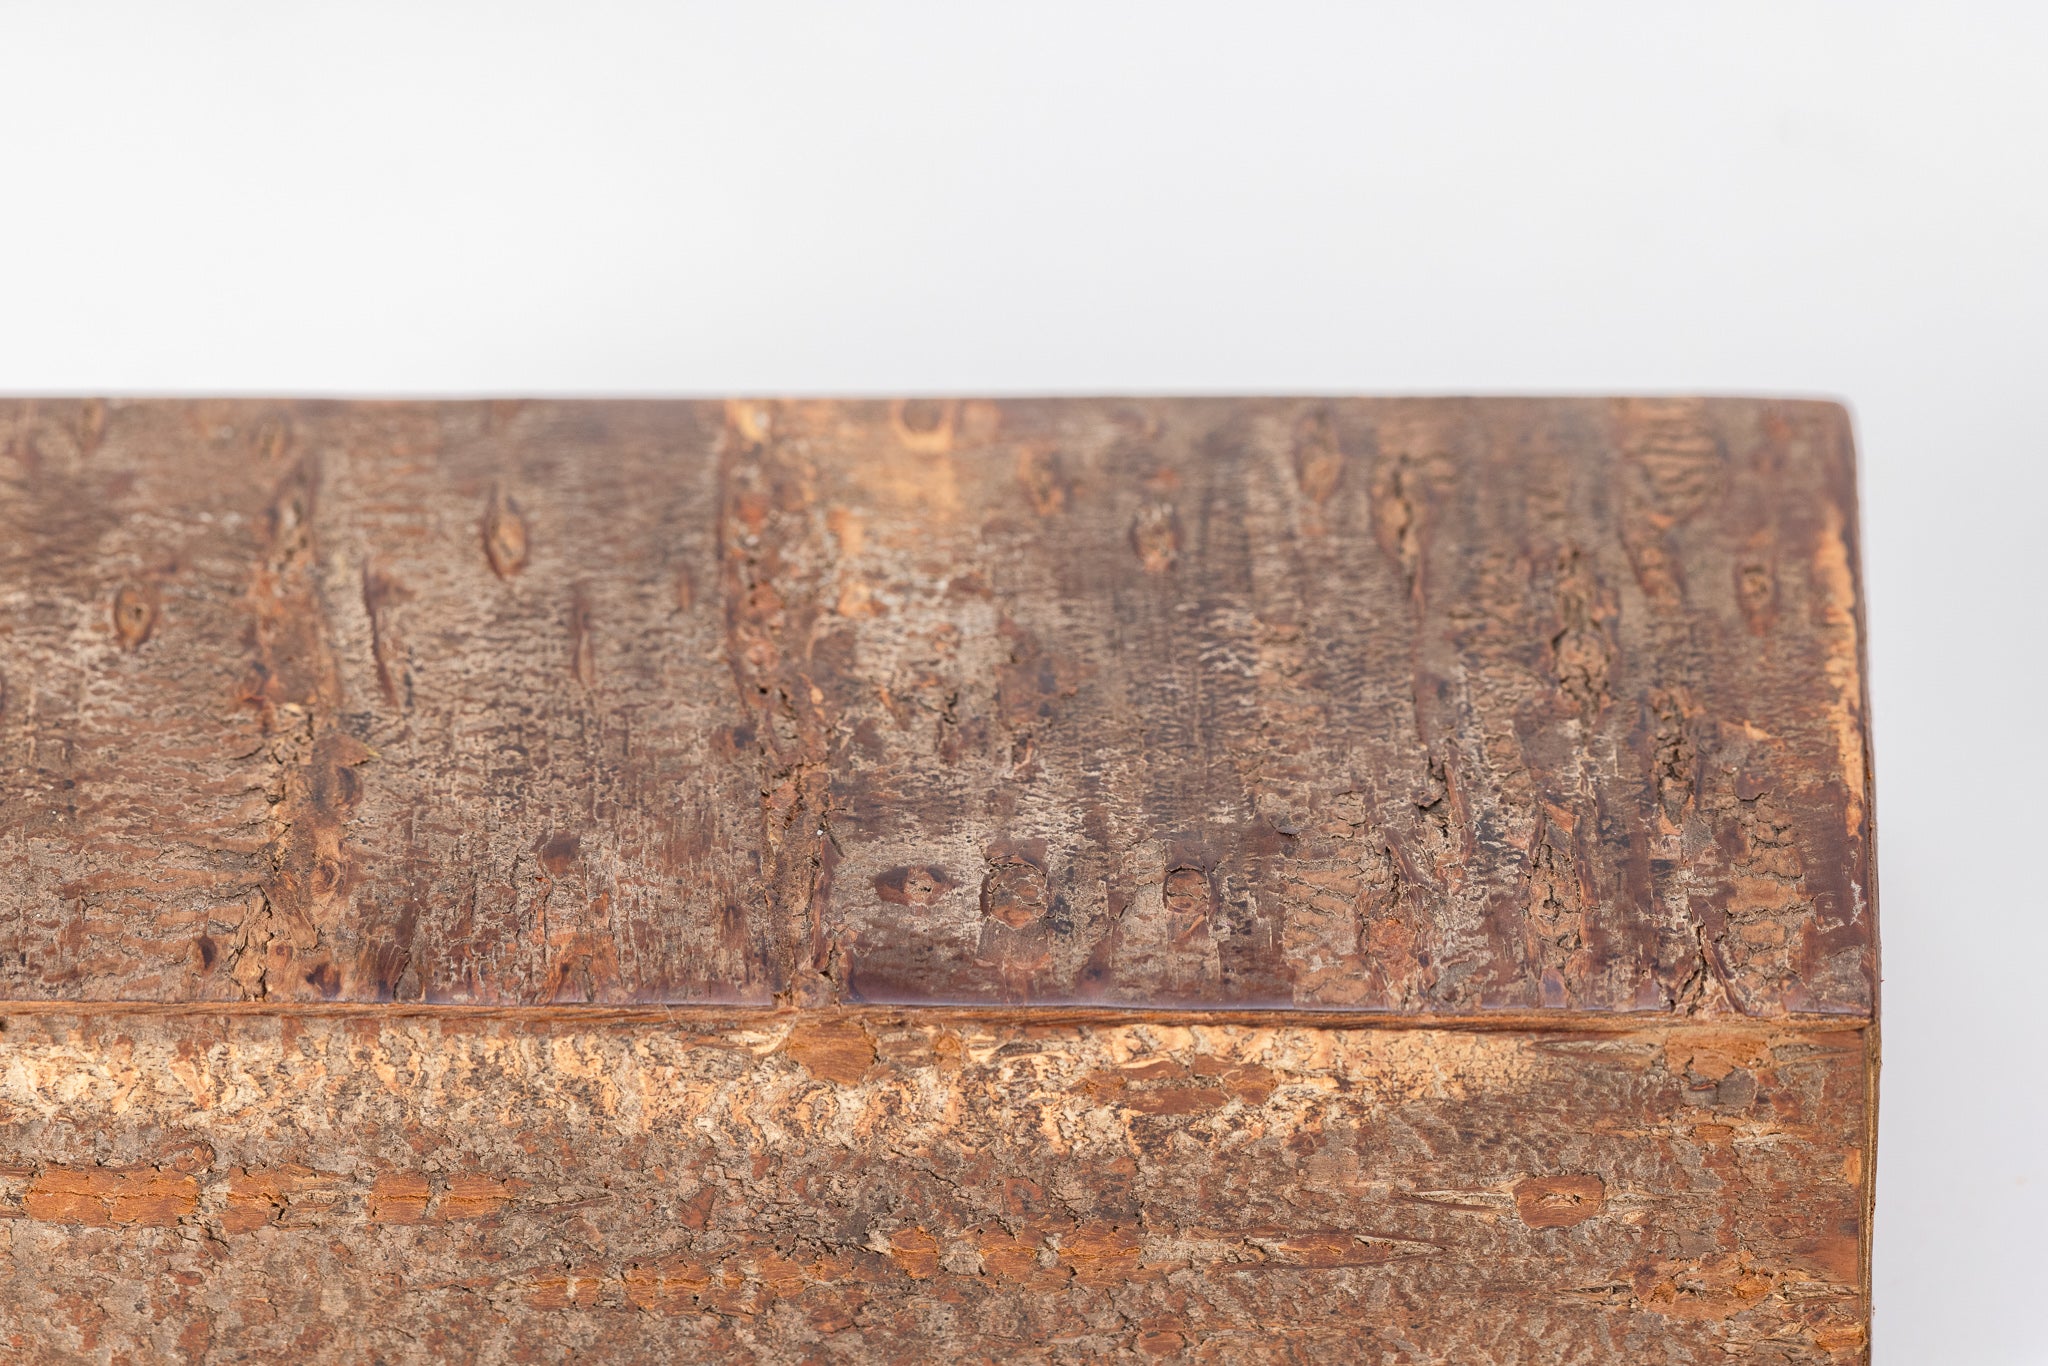 A close up of a rectangular wooden box made of cherry bark sits on a white background with its lid closed. The outside of the box is rough like the bark of a cherry tree and has a lot of texture.